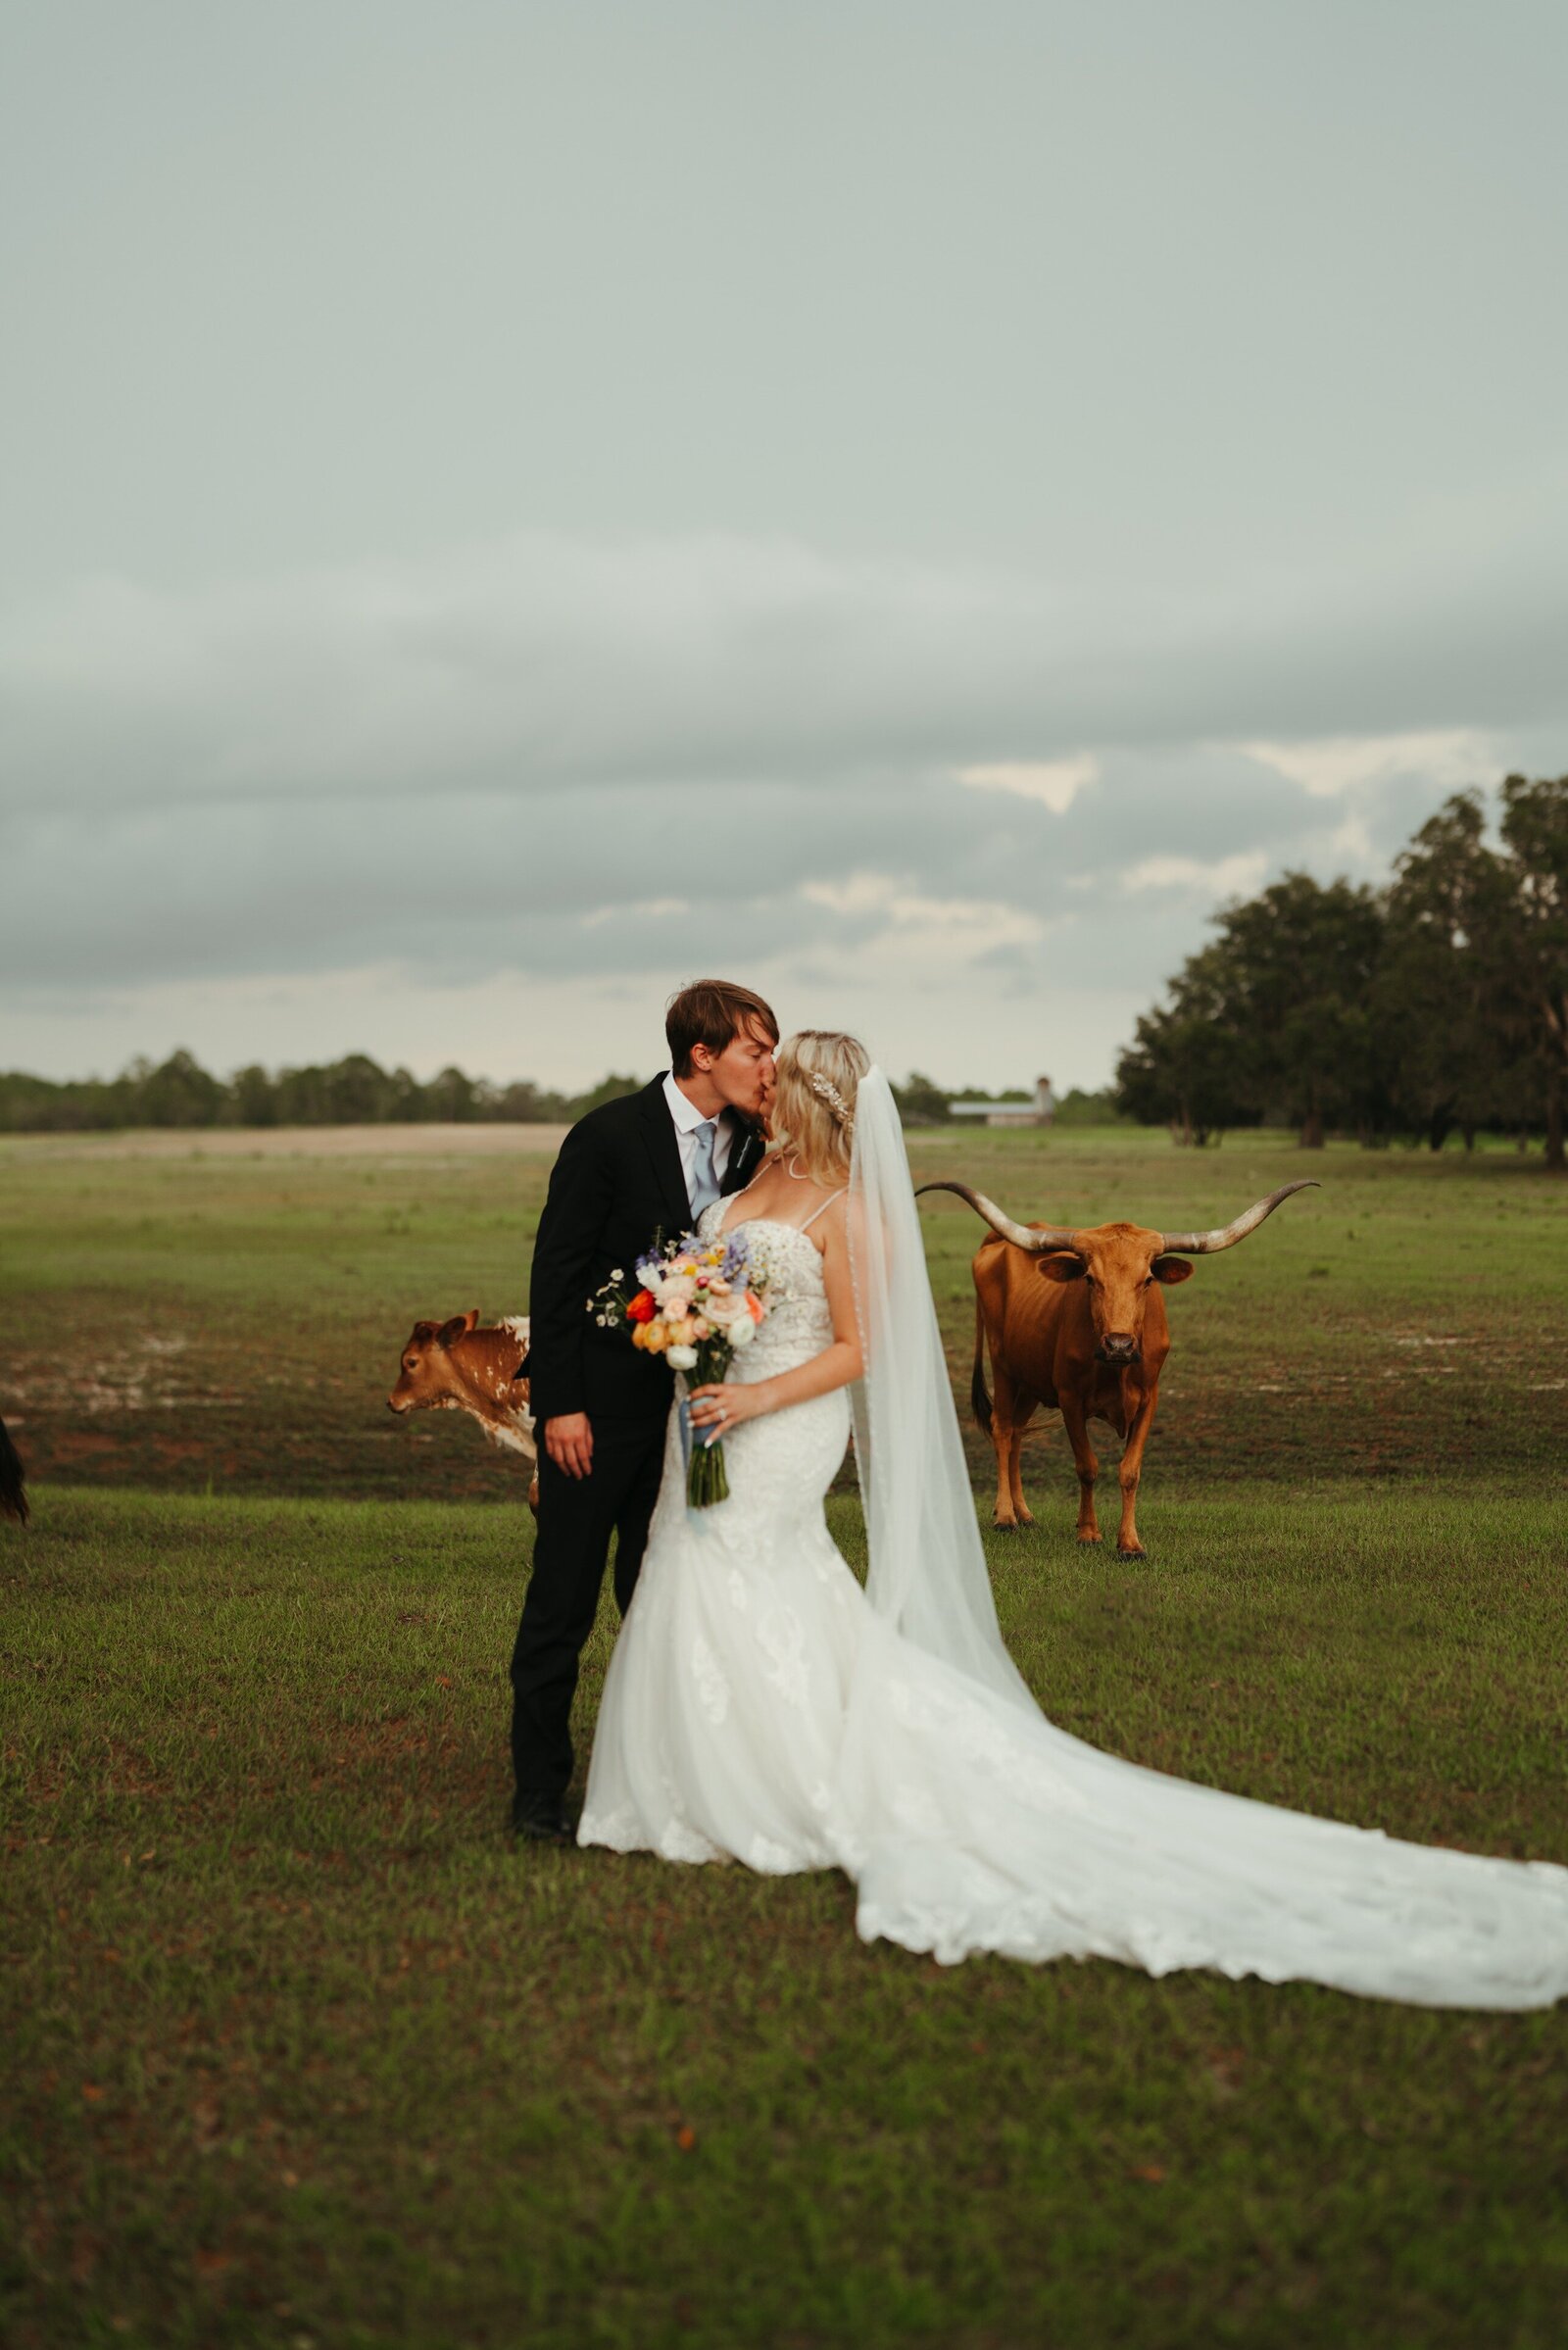 Legacy at Oak Meadows Wedding Venue - Pierson - Gainesville Florida - Weddings and Events73